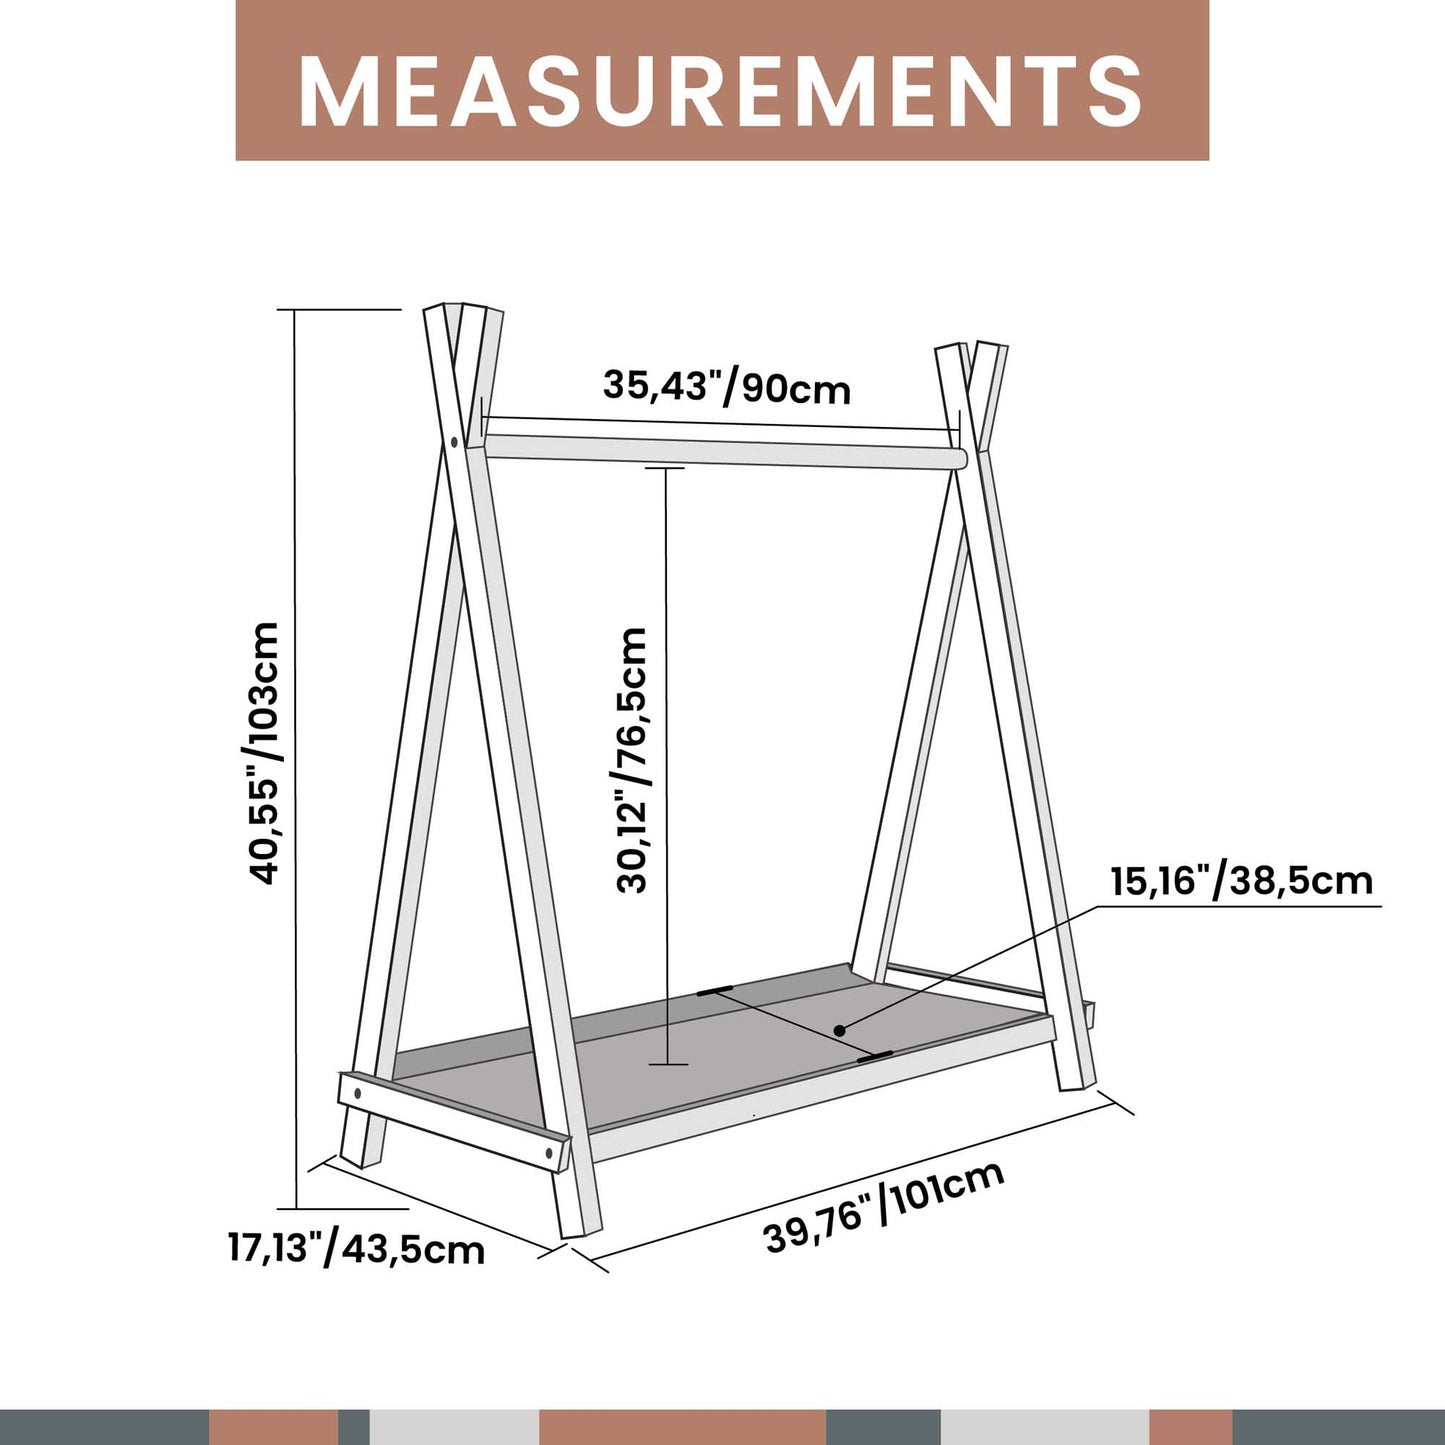 Measurements for a Sweet Home From Wood Kids' clothing rack with storage.